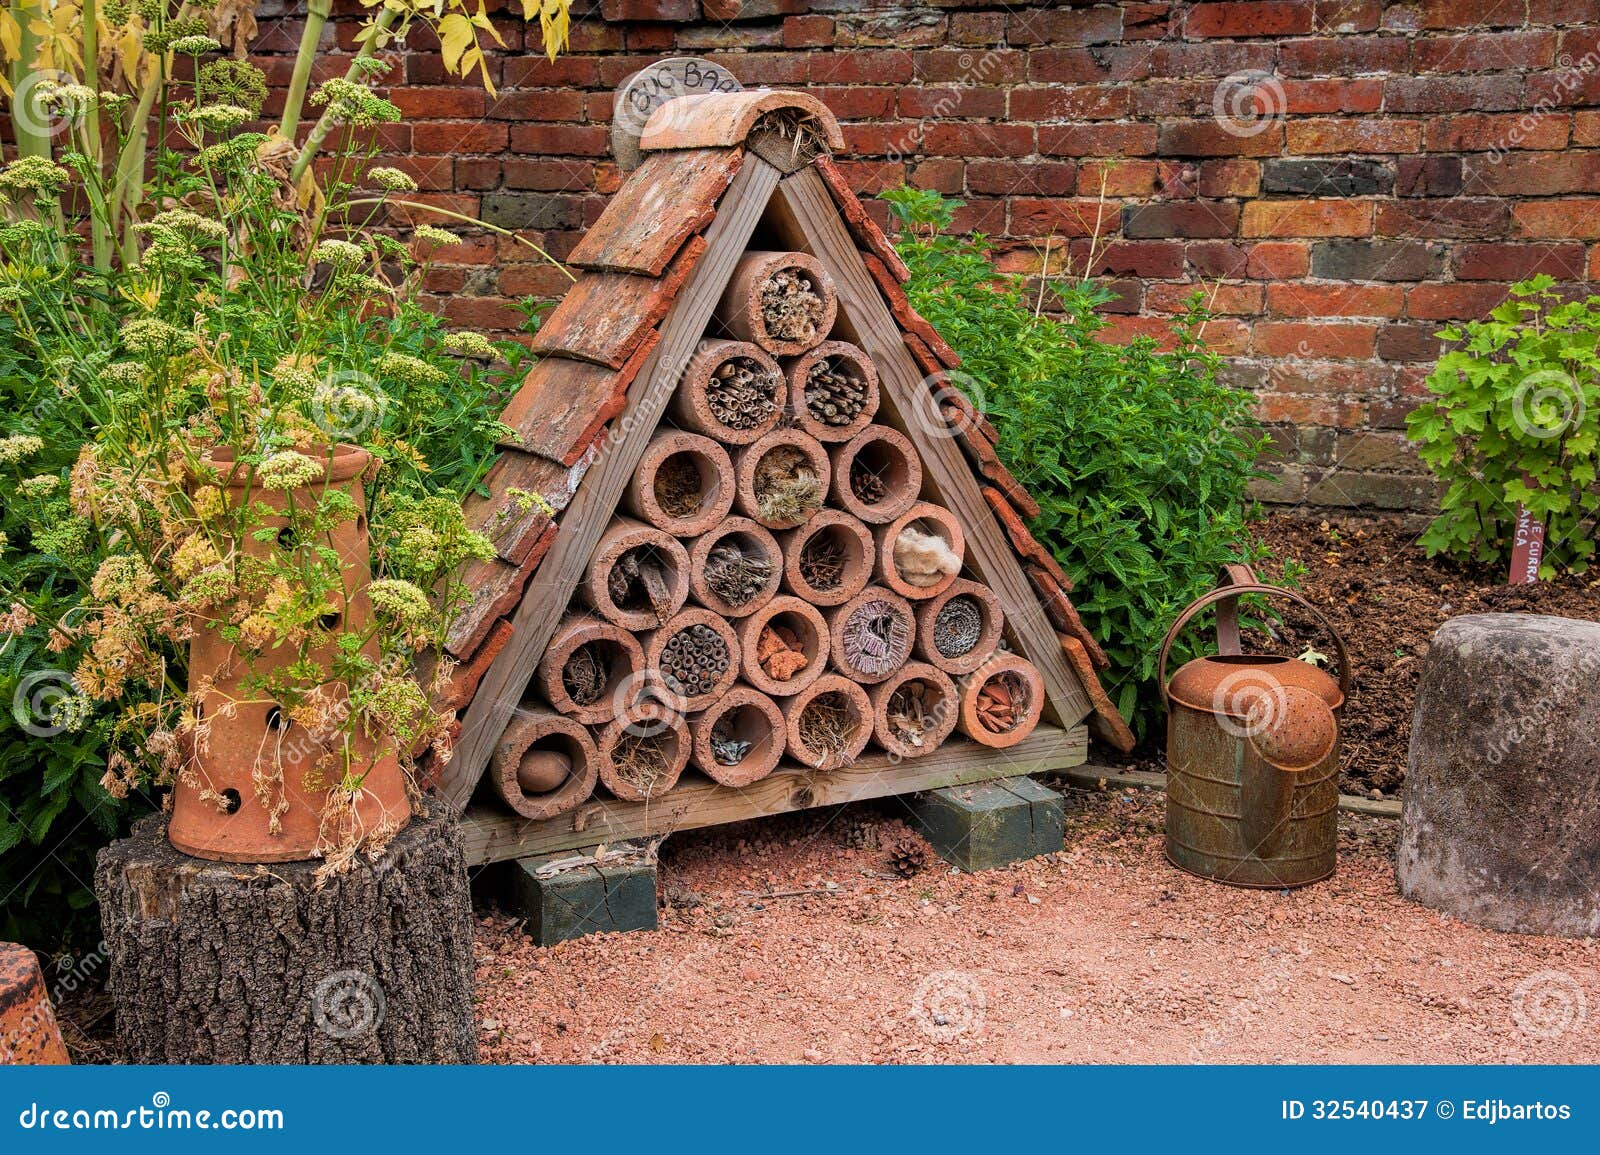 bug or insect house